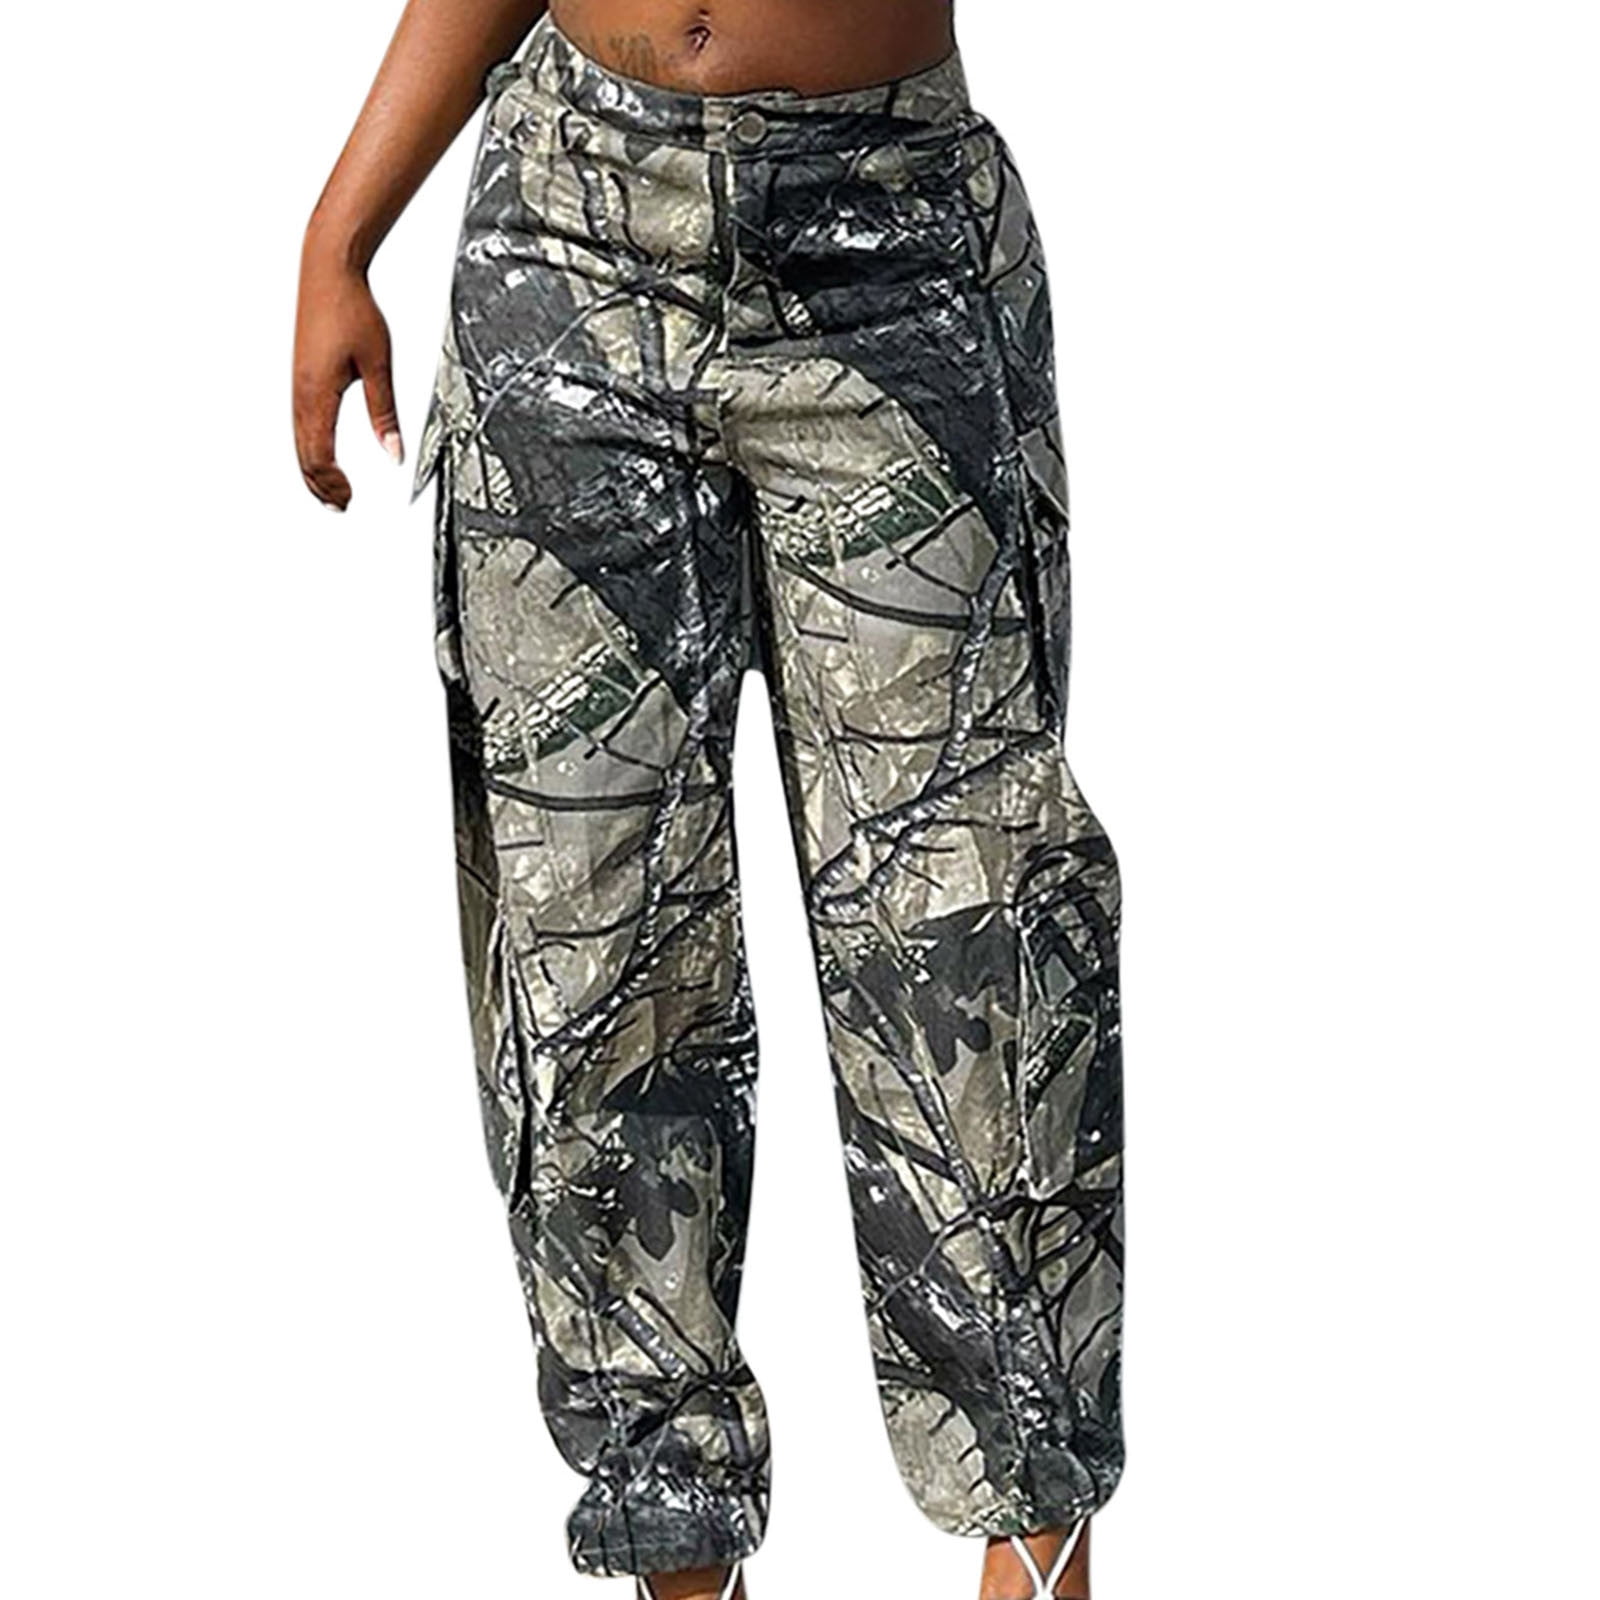 Gosuguu Womens Cargo Pants, Women Casual High Waist Bound Feet Trousers  Camoflage Jogger Sweatpants with Pockets Clearance Items Deals Under 5  Dollars #1 